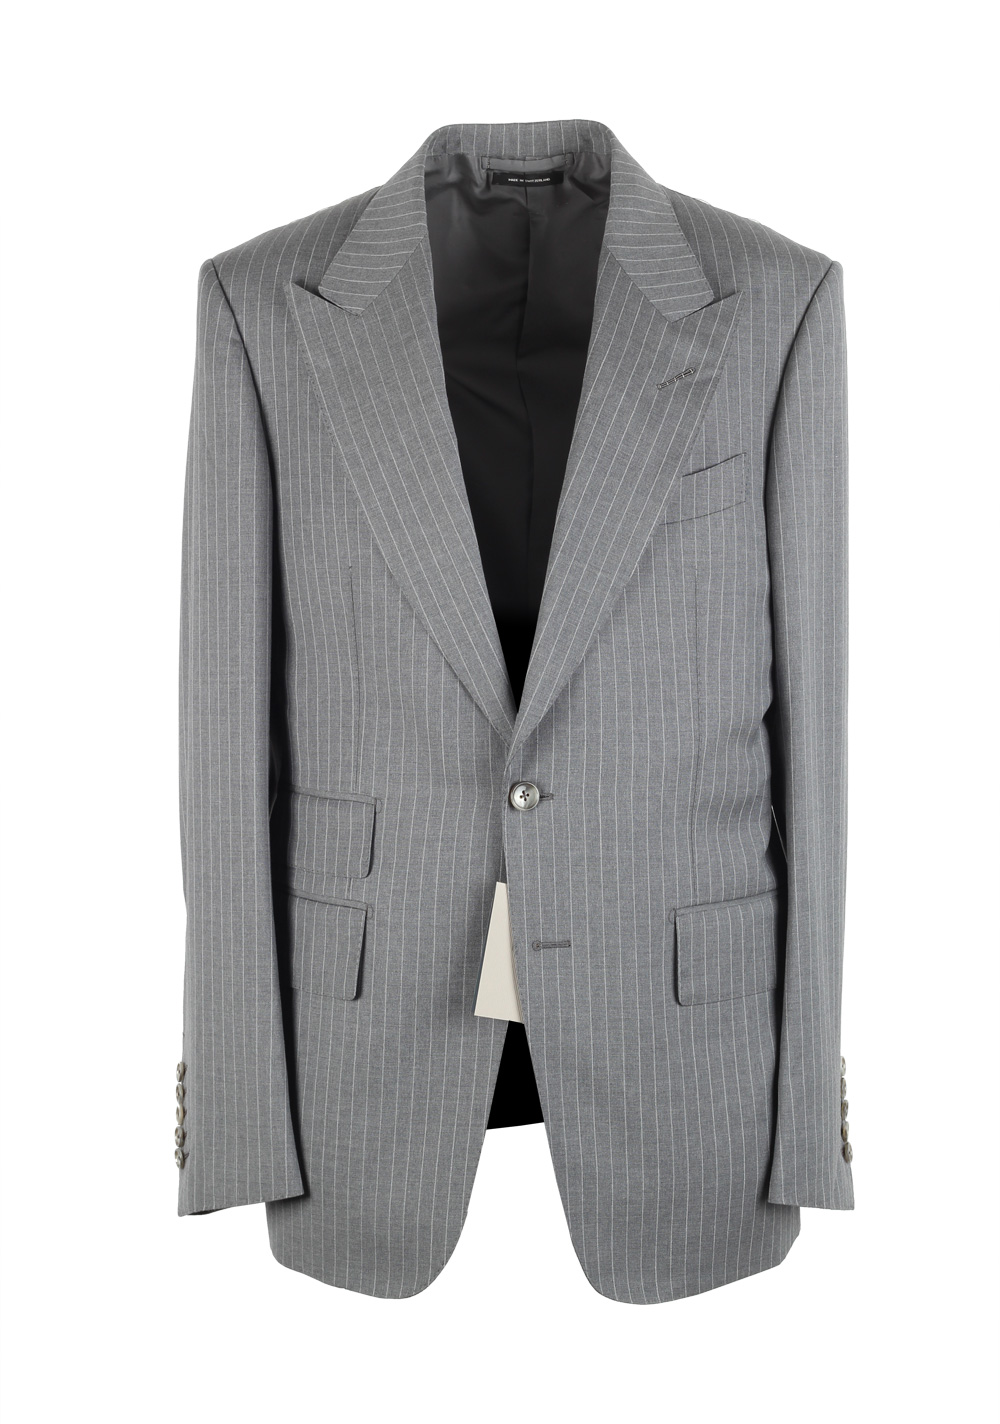 TOM FORD Shelton Striped Gray Suit Size 48 / 38R U.S. In Wool | Costume ...